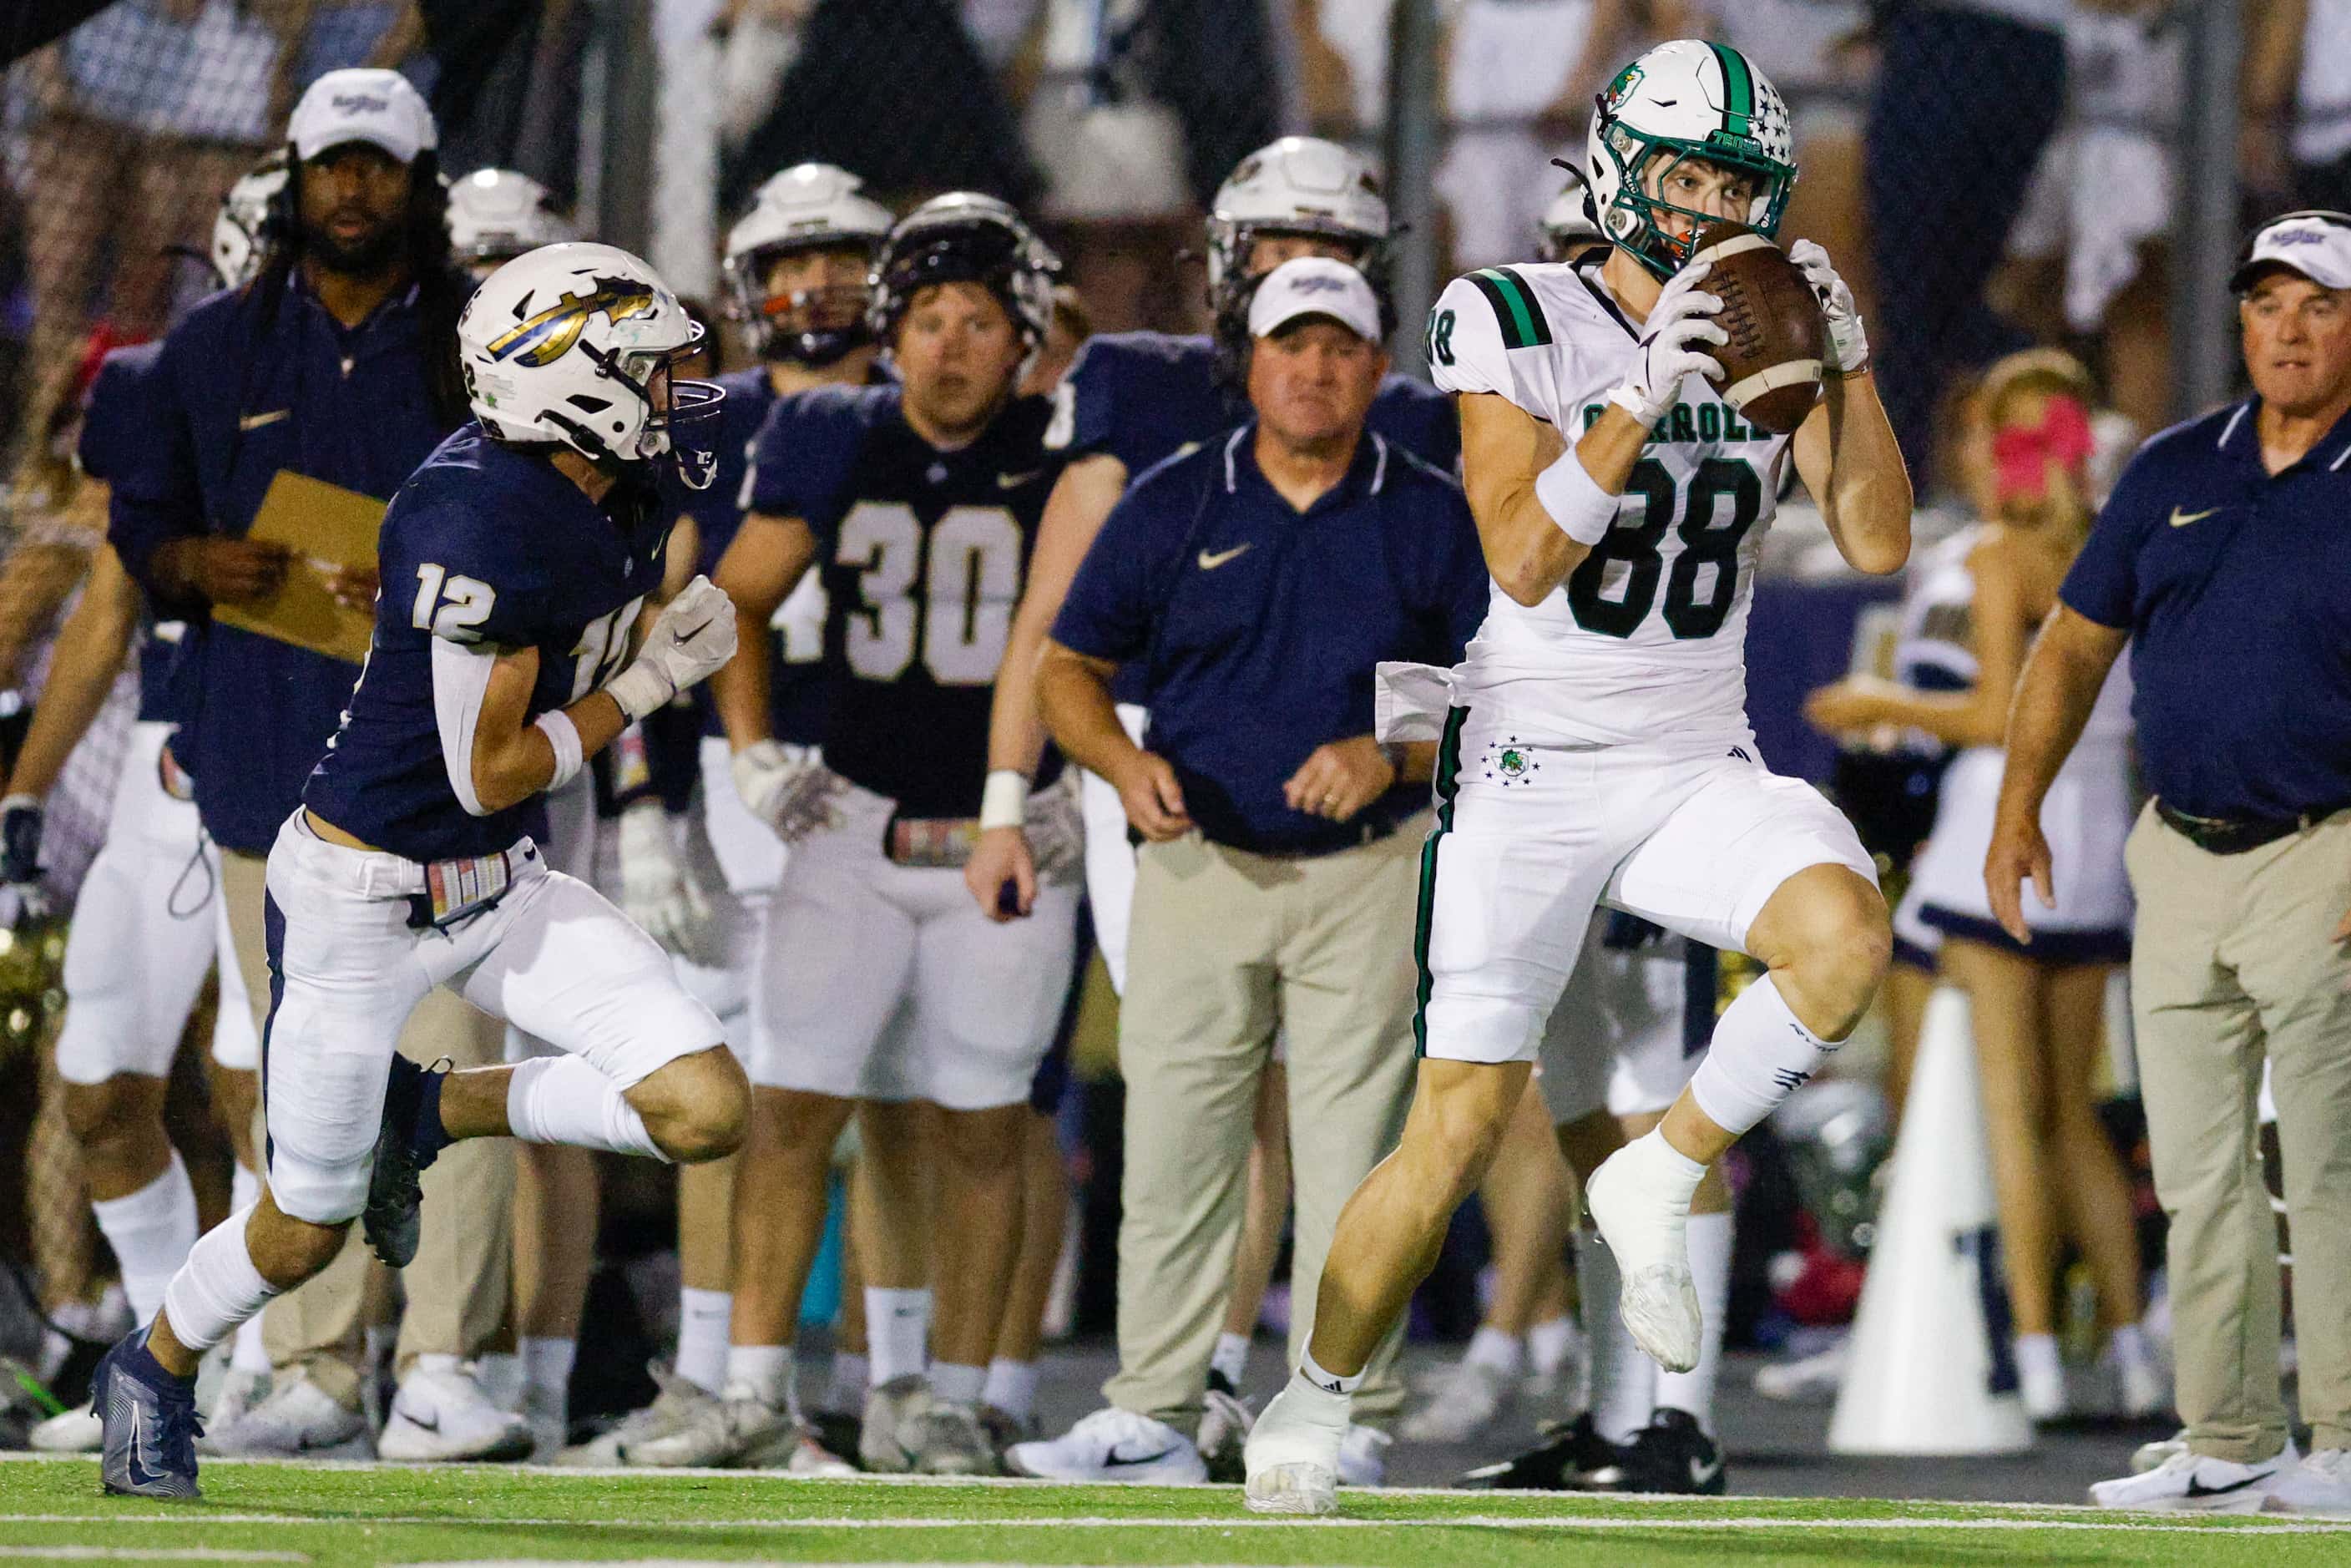 Southlake Carroll tight end Jack Van Dorselaer (88) makes a catch for a 91-yard touchdown...